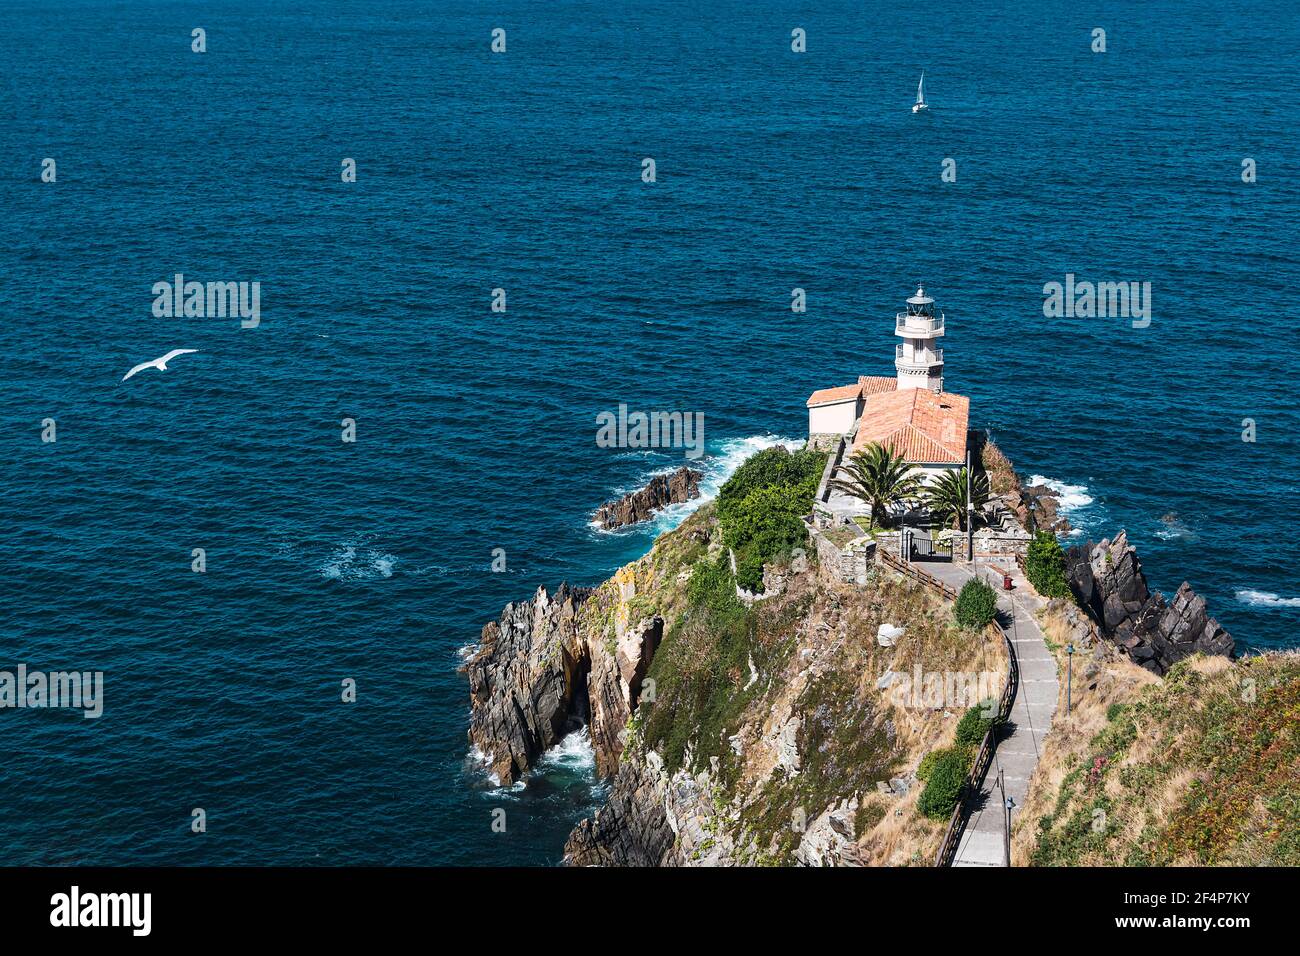 Landscape of the Cantabrian sea and the lighthouse of Cudillero, a typical coastal town of Asturias that is located in the north of Spain Stock Photo